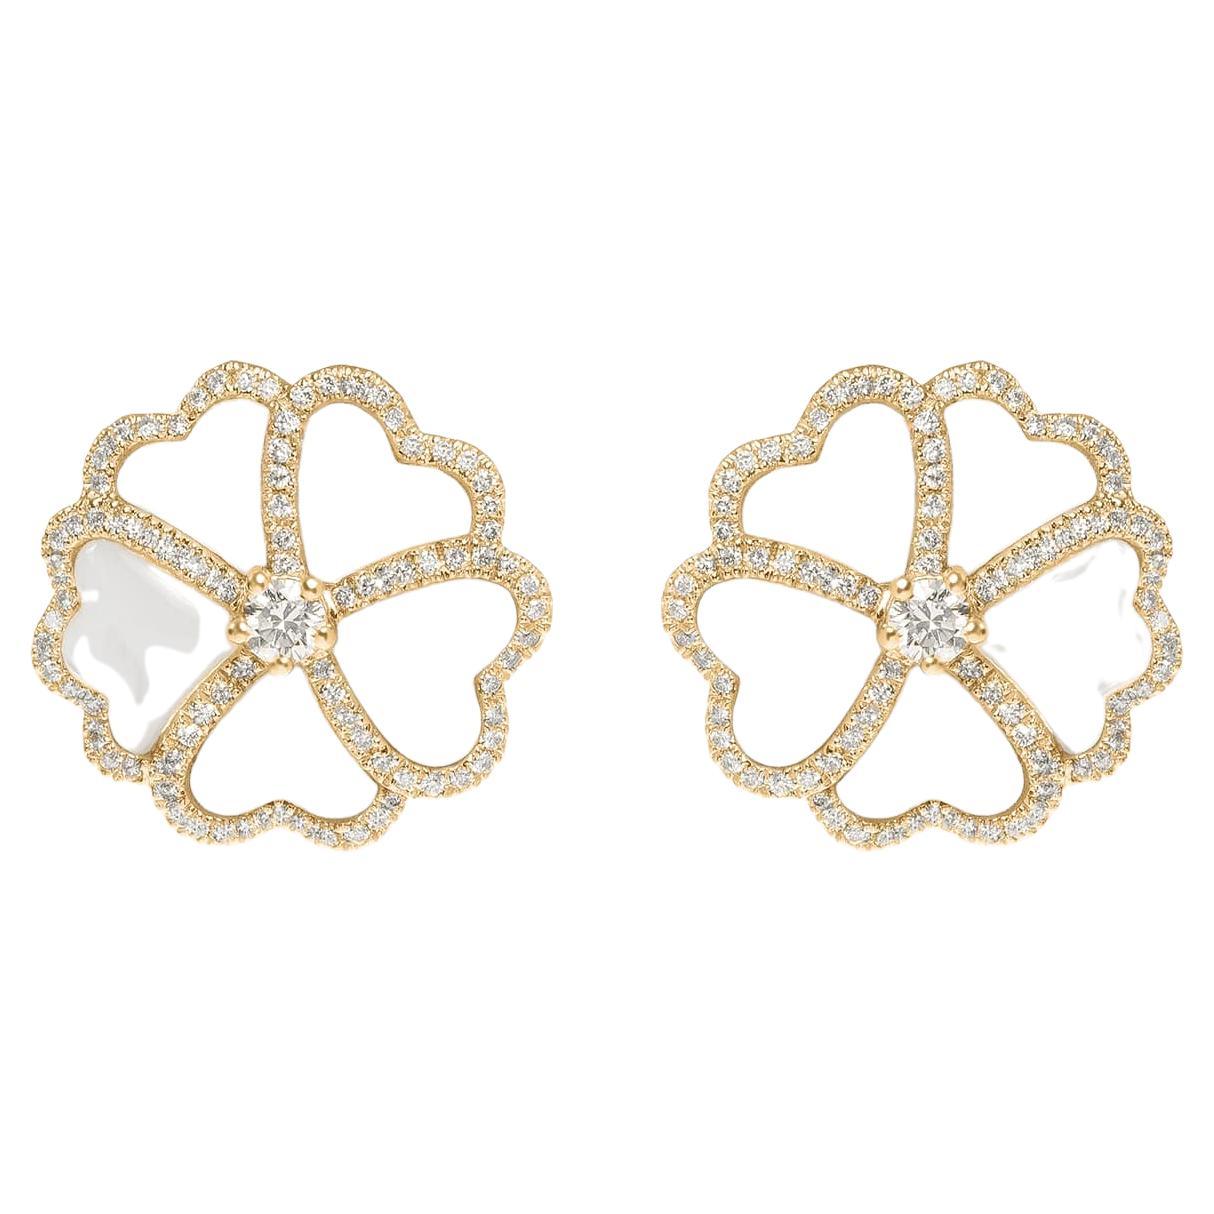 Bloom Diamond and White Mother-of-pearl Flower Stud Earrings in 18k Yellow Gold